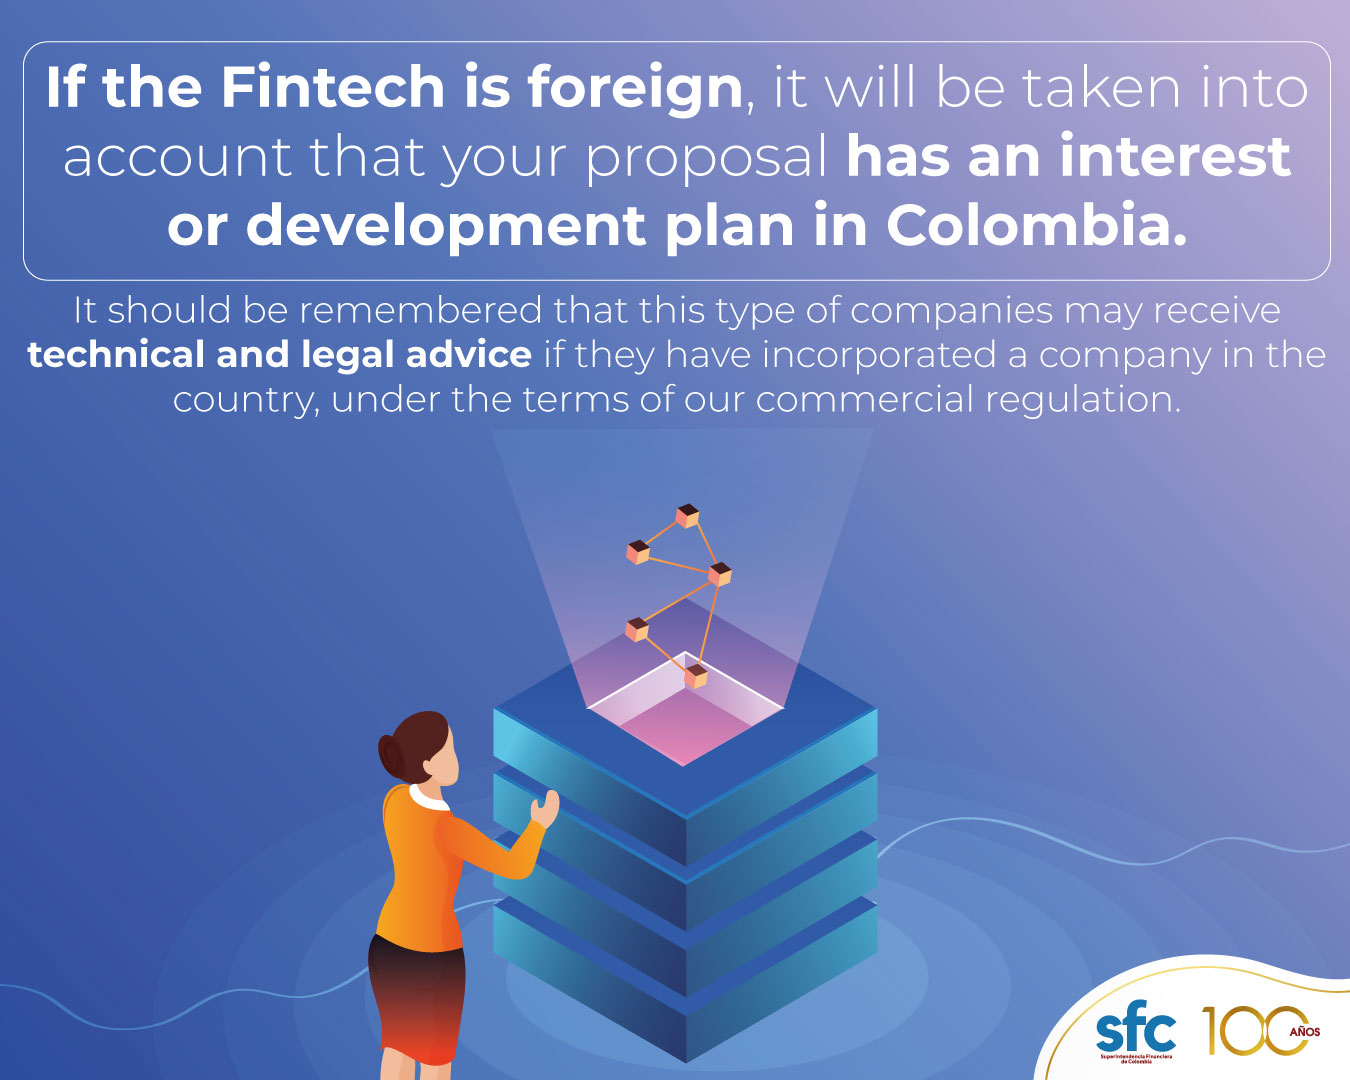 6. What are the conditions for foreign Fintechs to participate in the SFC 2022 Sandbox Challenge?